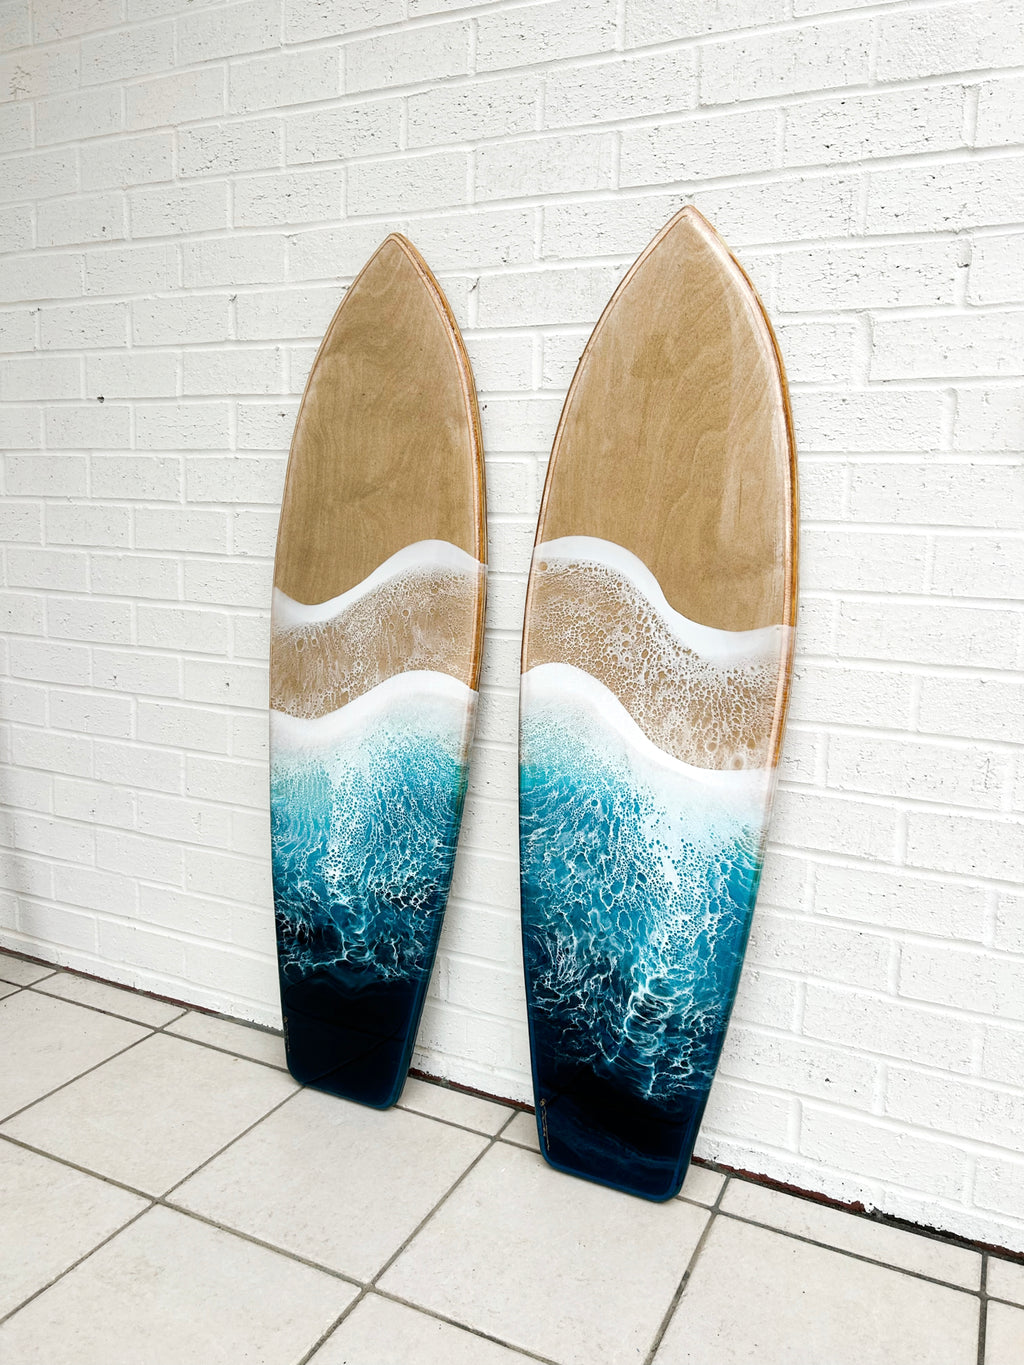 4’ Birch Surfboards with Local Sand